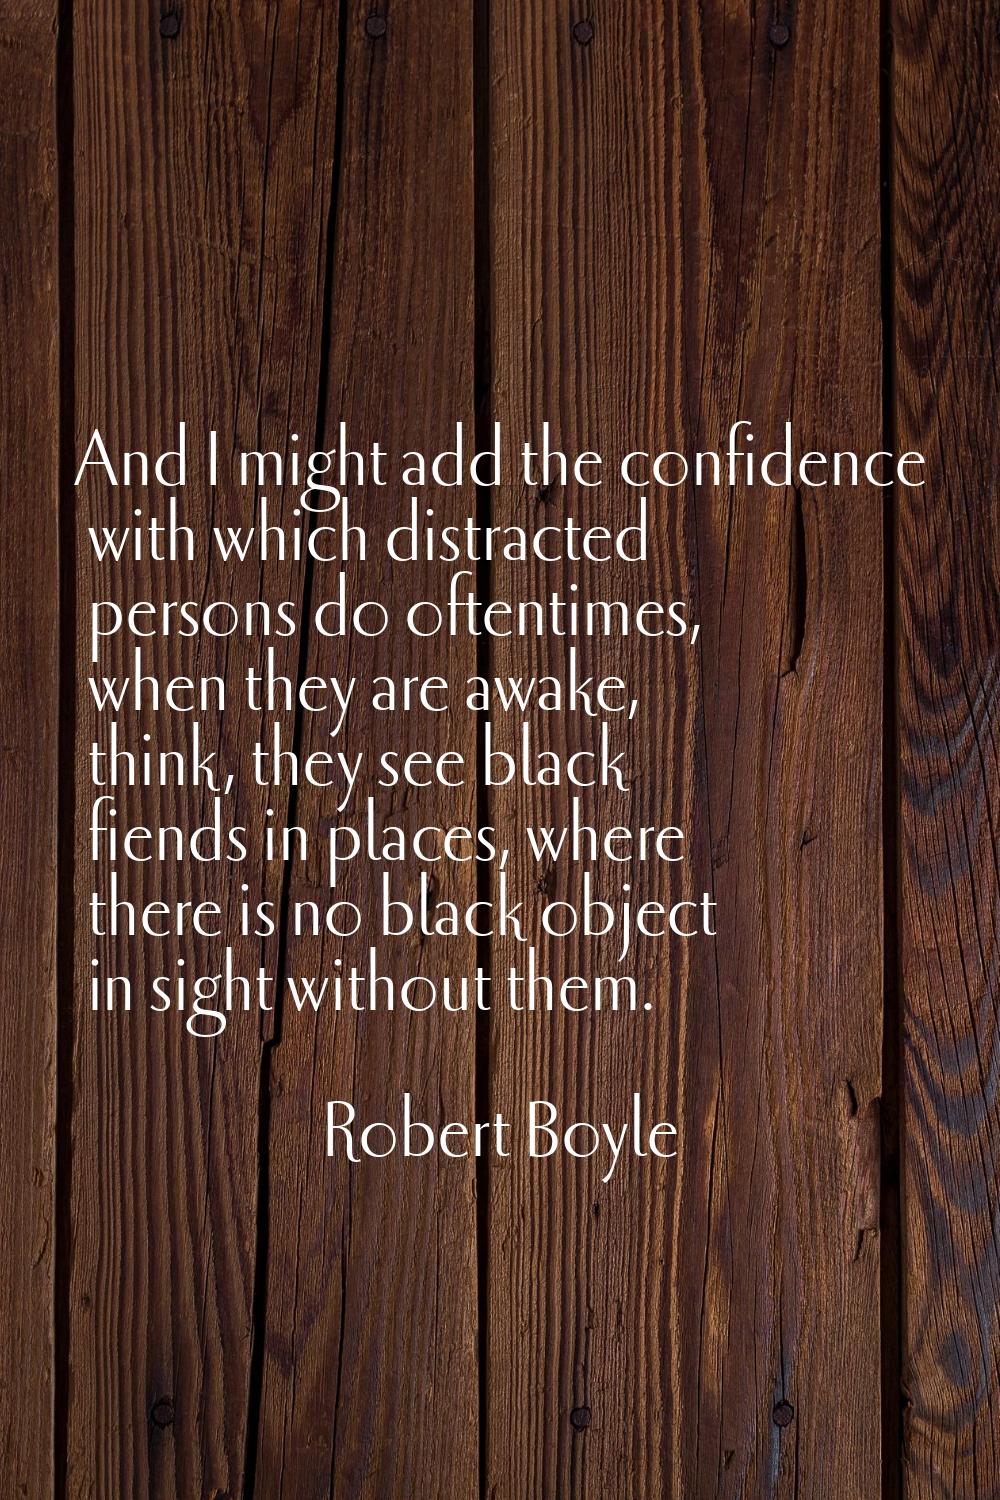 And I might add the confidence with which distracted persons do oftentimes, when they are awake, th